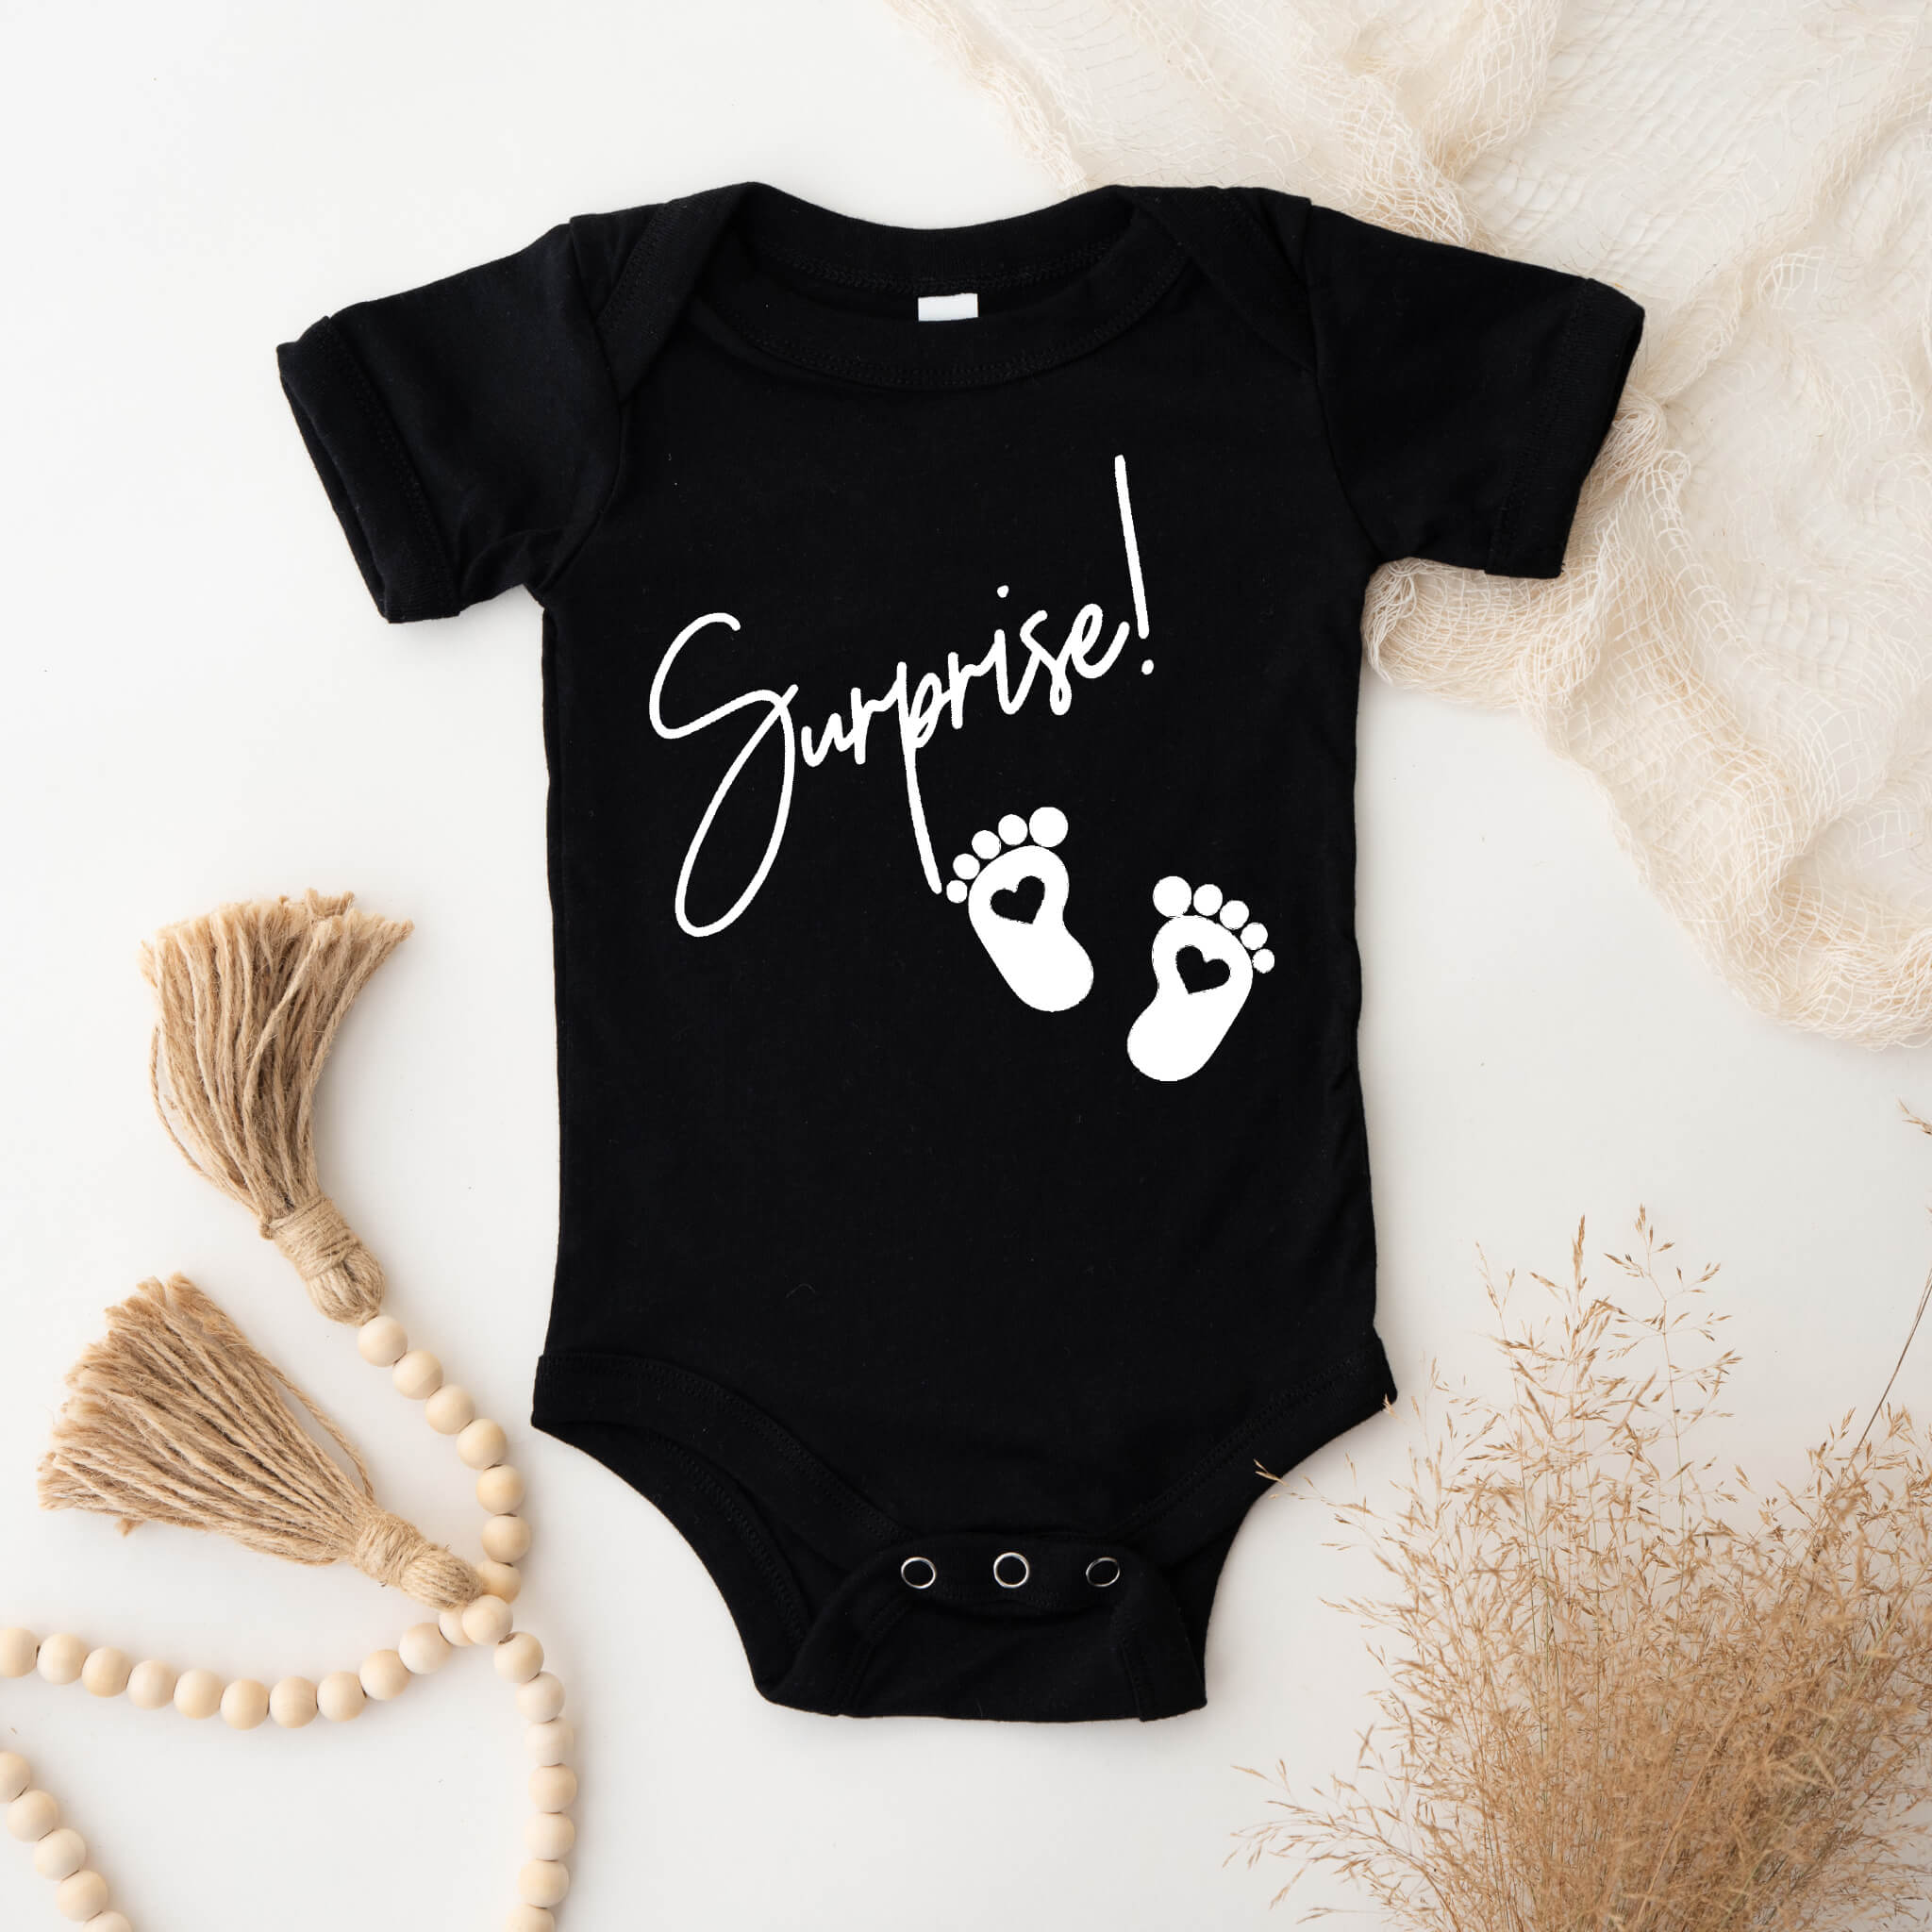 Pregnancy Announcement Gift for Grandparents to be, Baby Coming Soon Reveal  idea for Grandma, Grandpa, Dad, Husband, Aunt, Uncle or Family to be